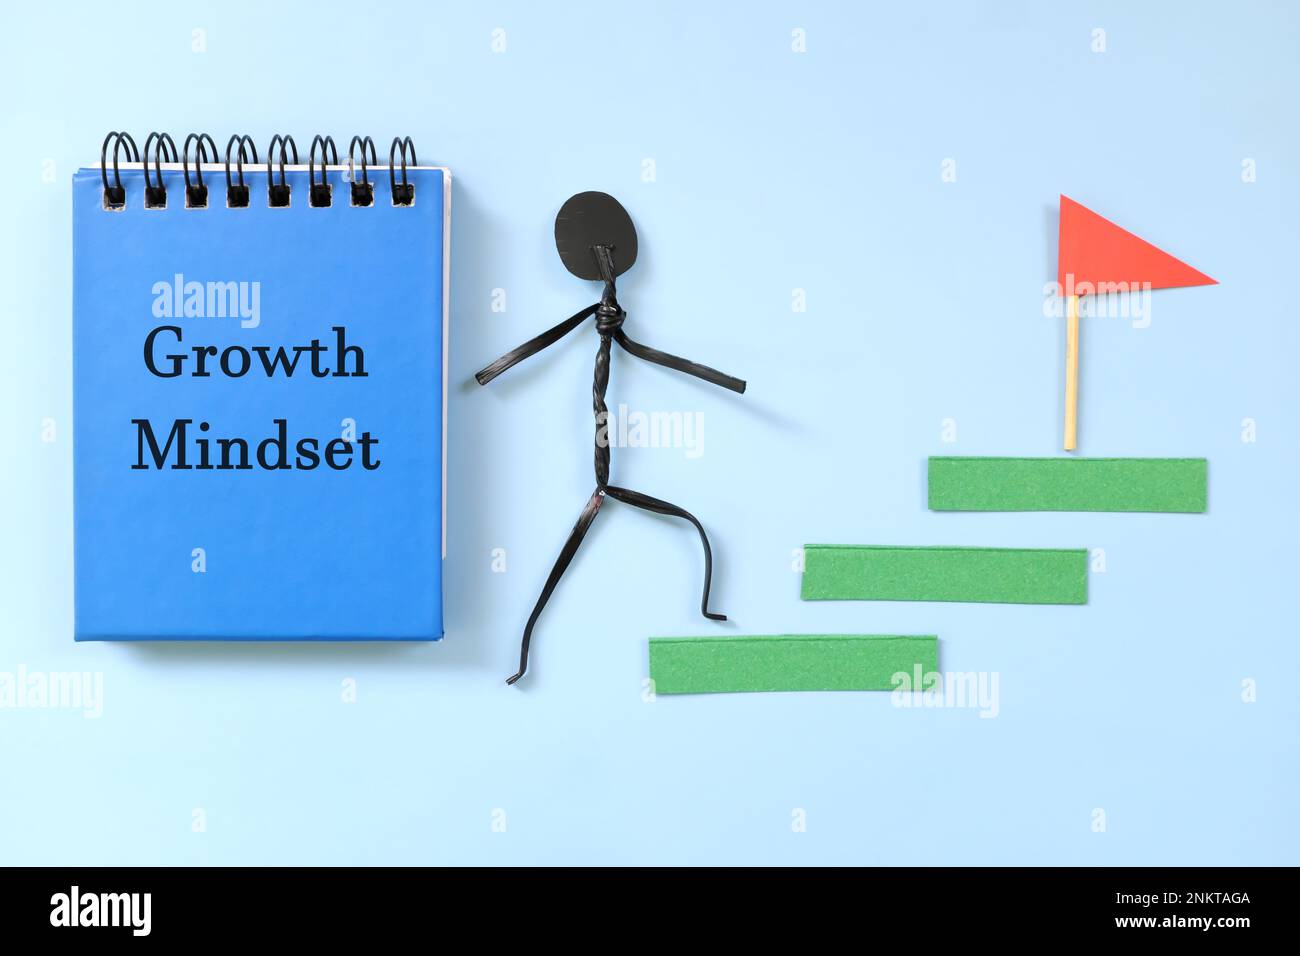 Growth mindset in career concept. Stick figure climbing ladder of success beside blue notepad with written text. Stock Photo